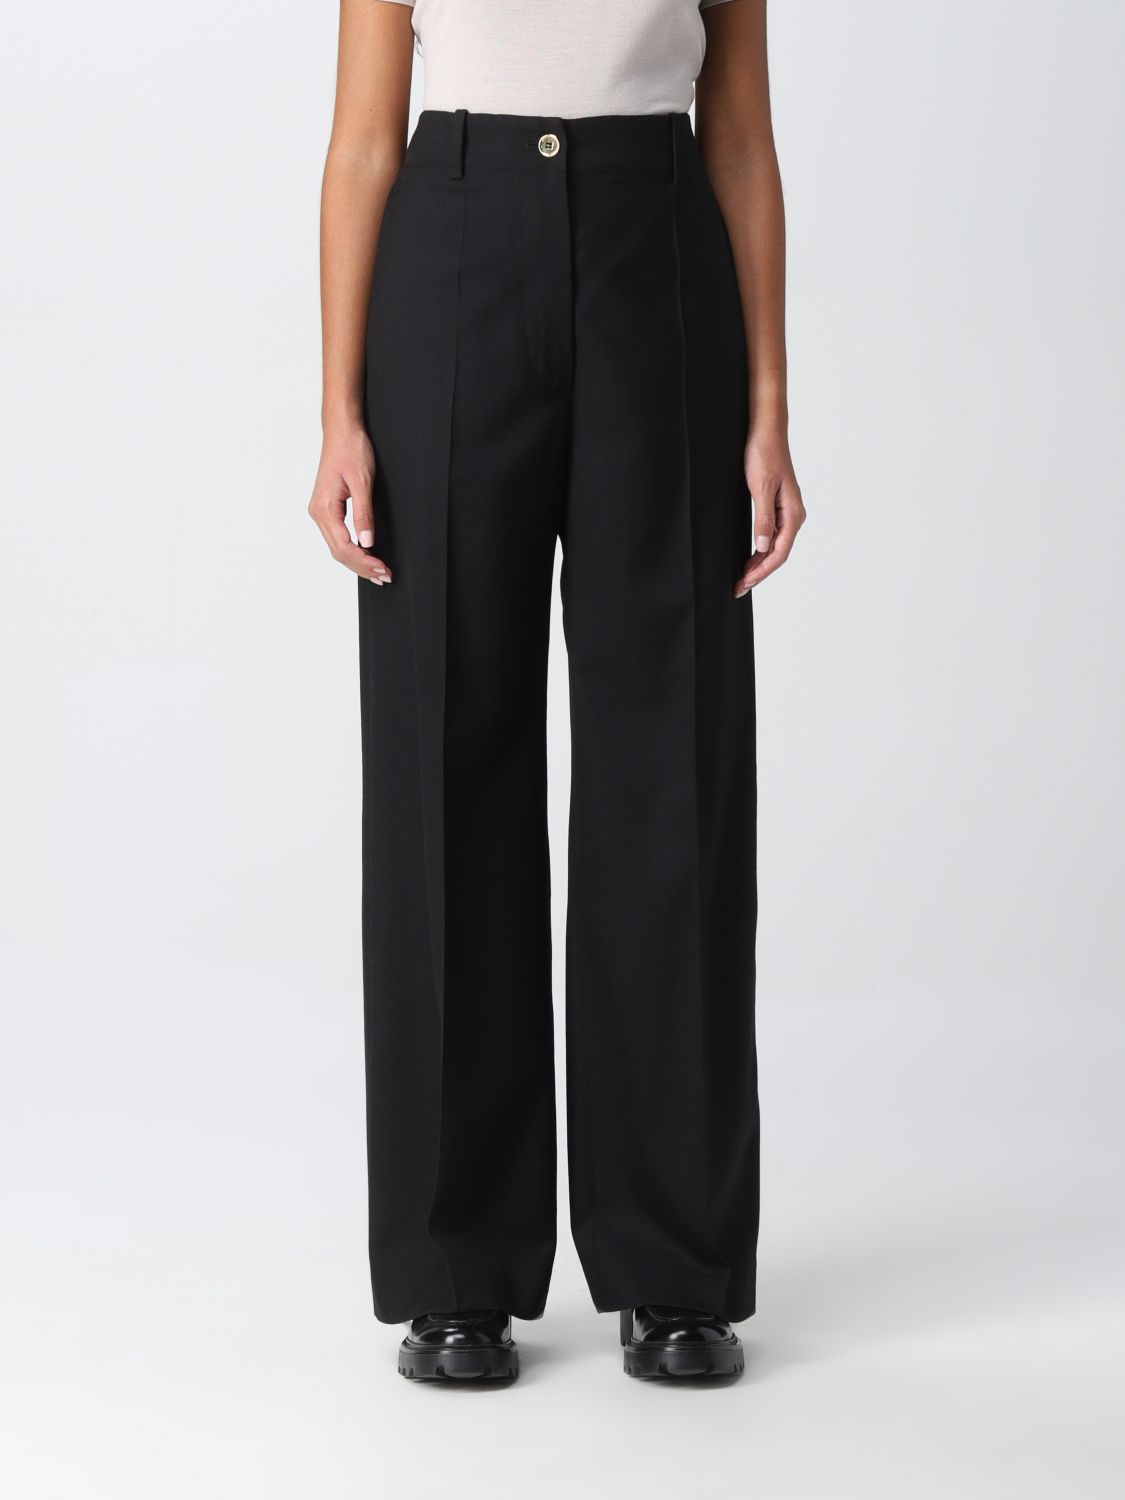 PATOU: pants for woman - Black | Patou pants TR0020005 online on GIGLIO.COM